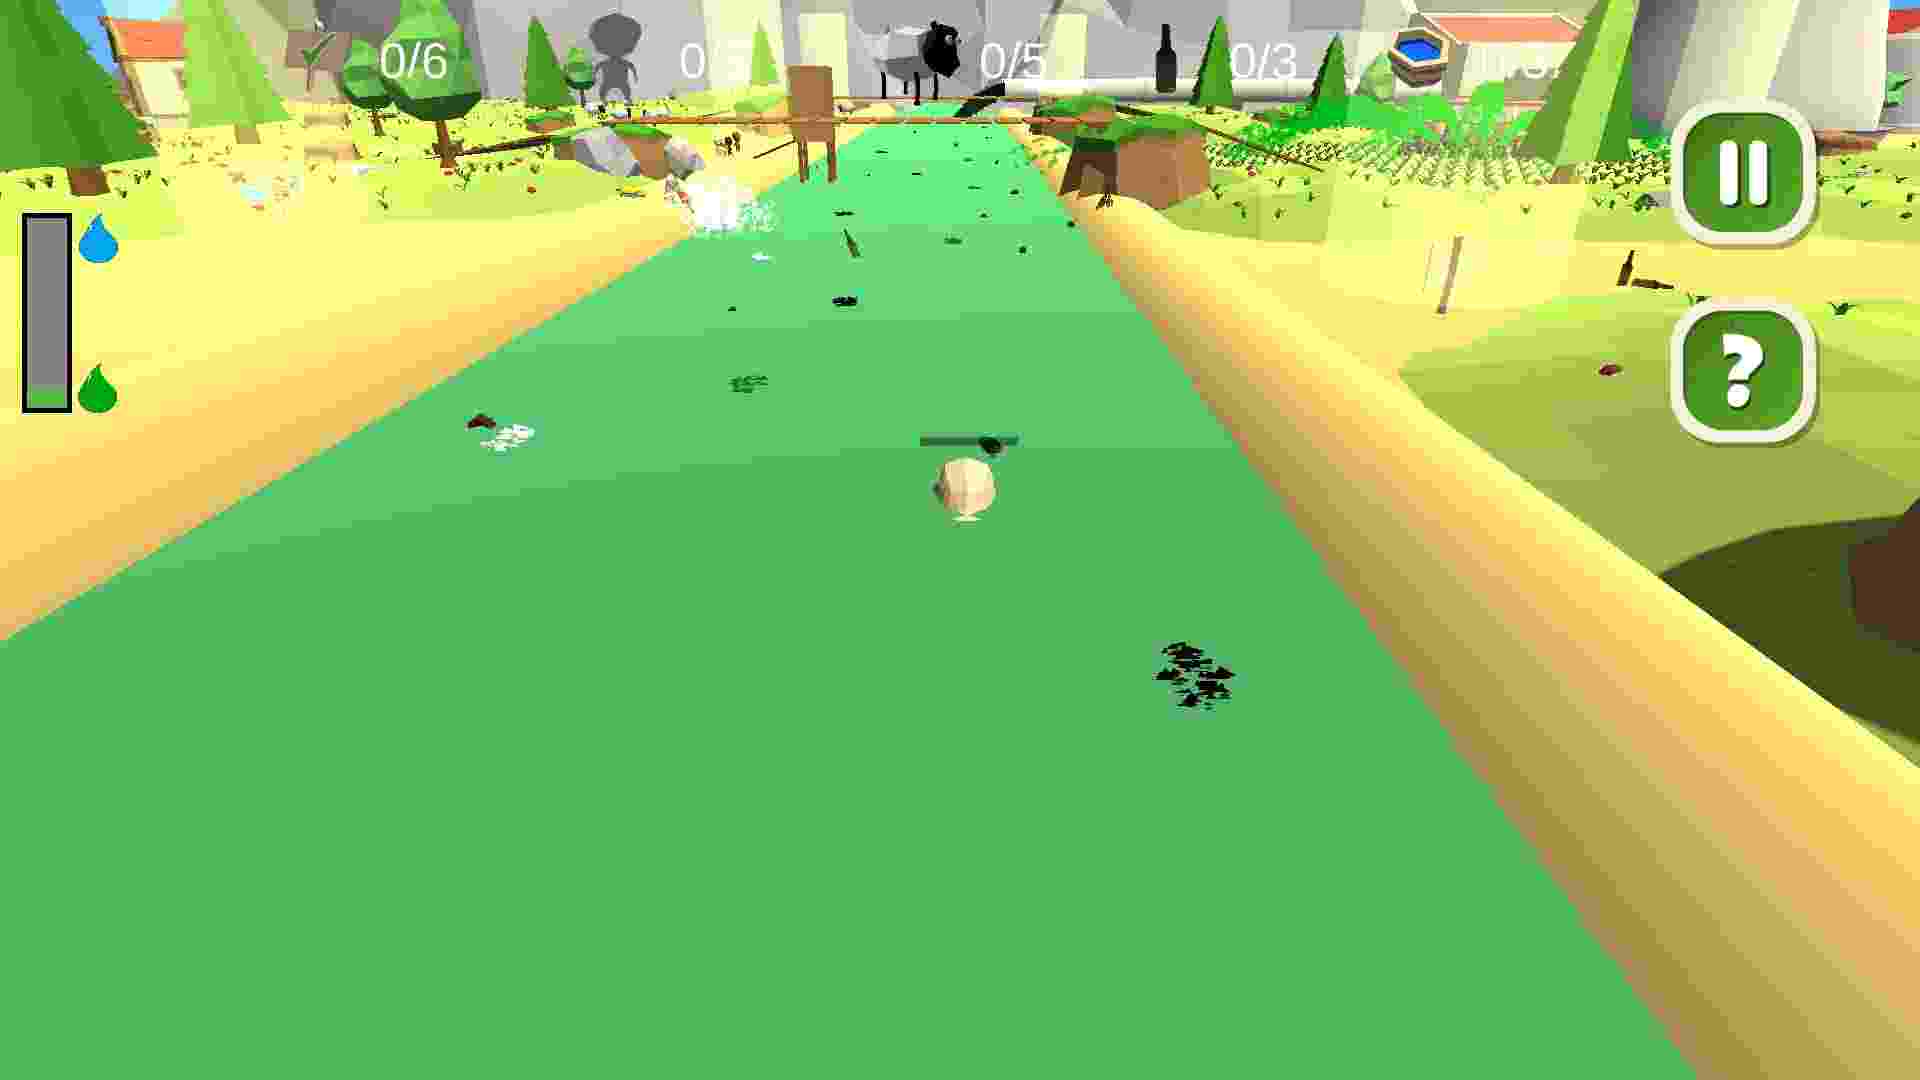 Image shows screenshot of the Clean the River game, showing a river flowing through urbanised areas